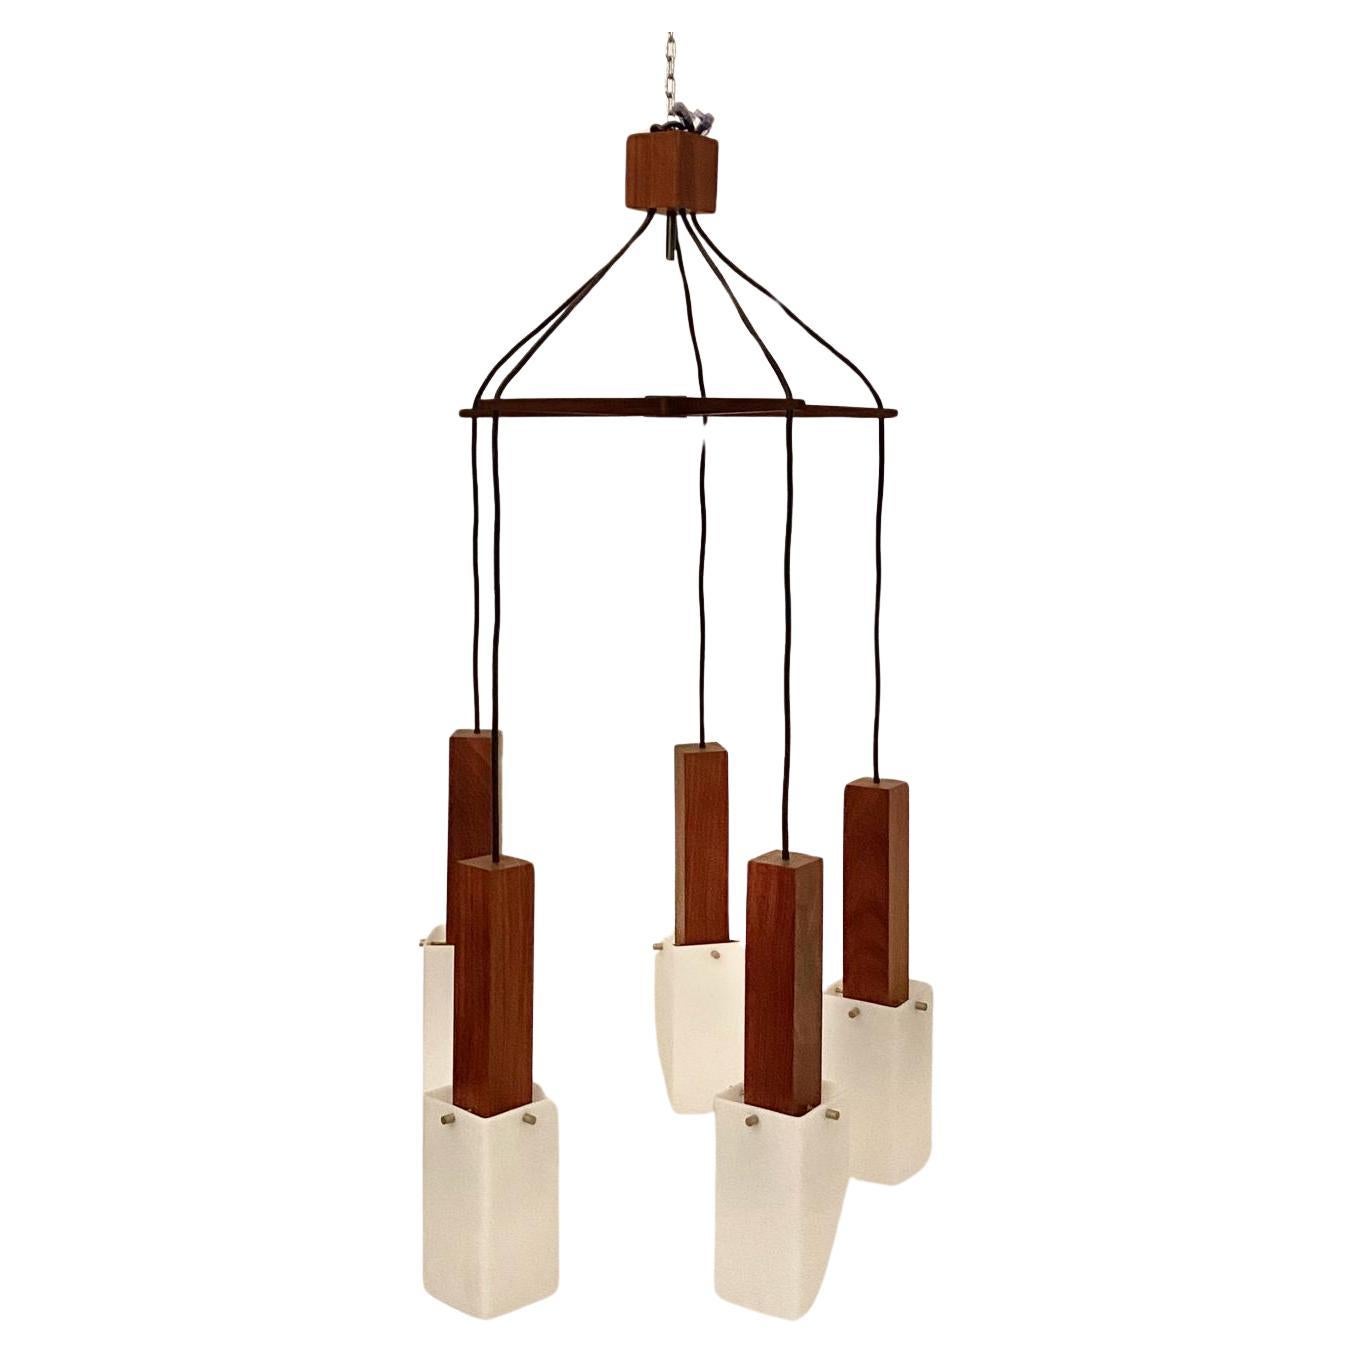 Vintage Wood Hanging Chandelier, Guzzini Italy, 1960 's